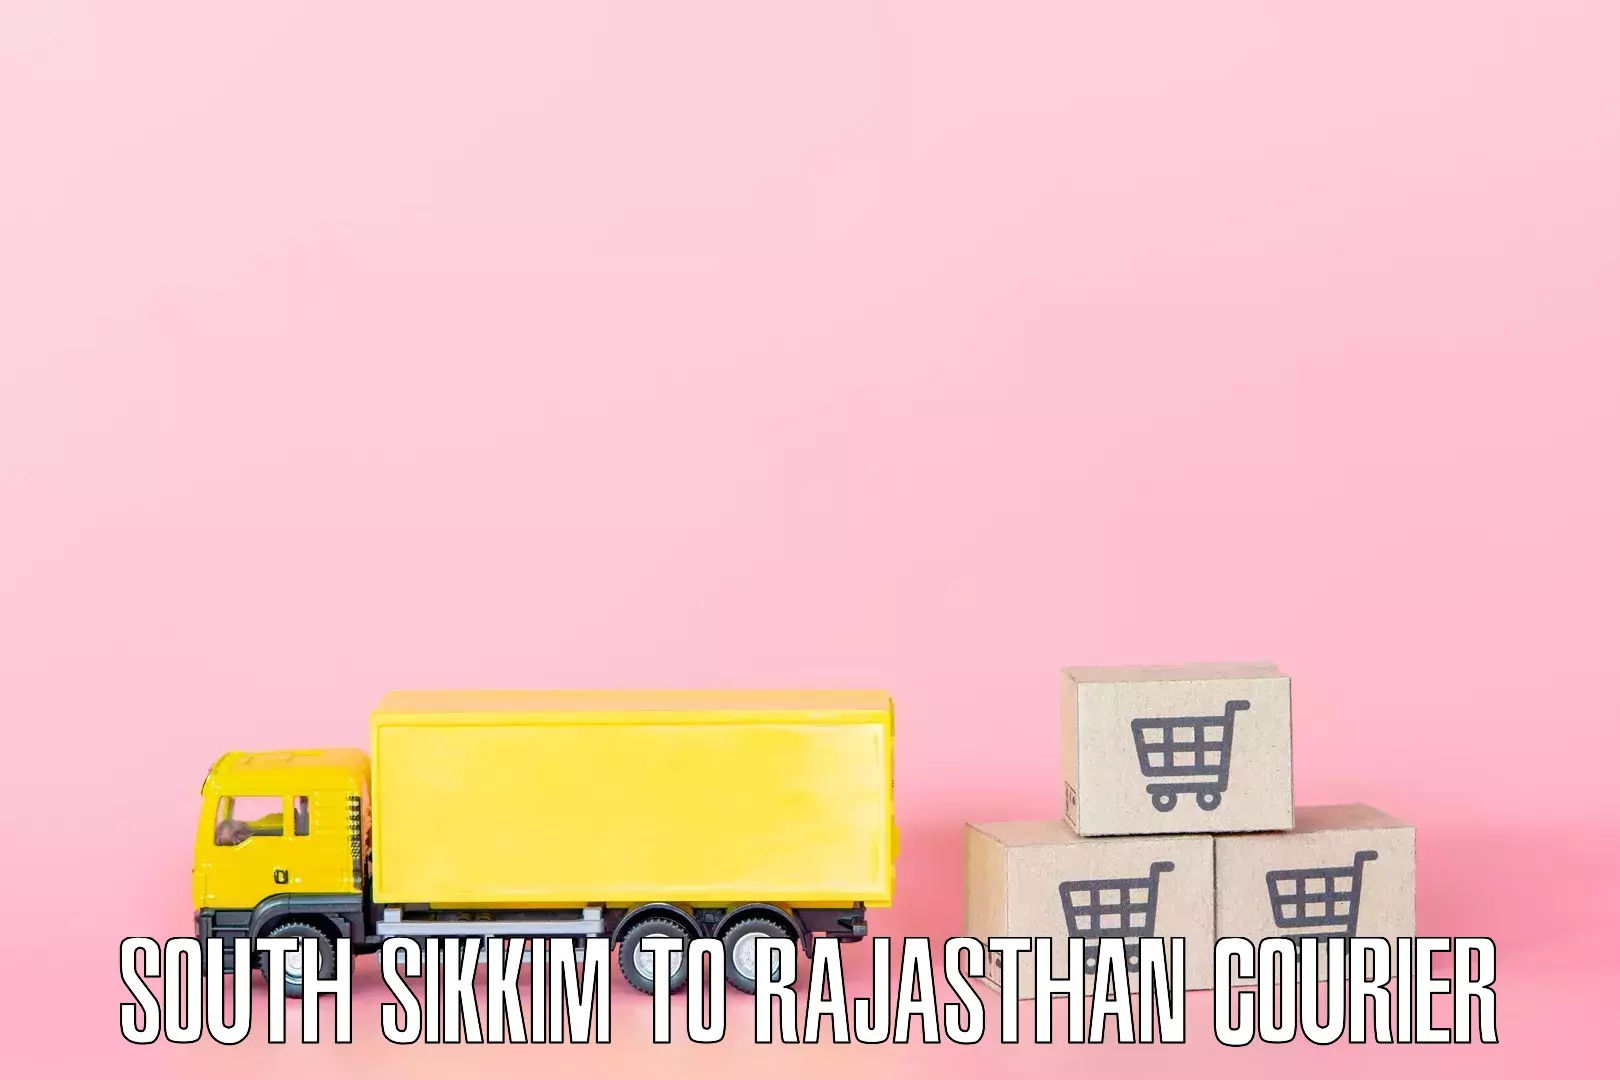 Specialized moving company South Sikkim to Rajasthan